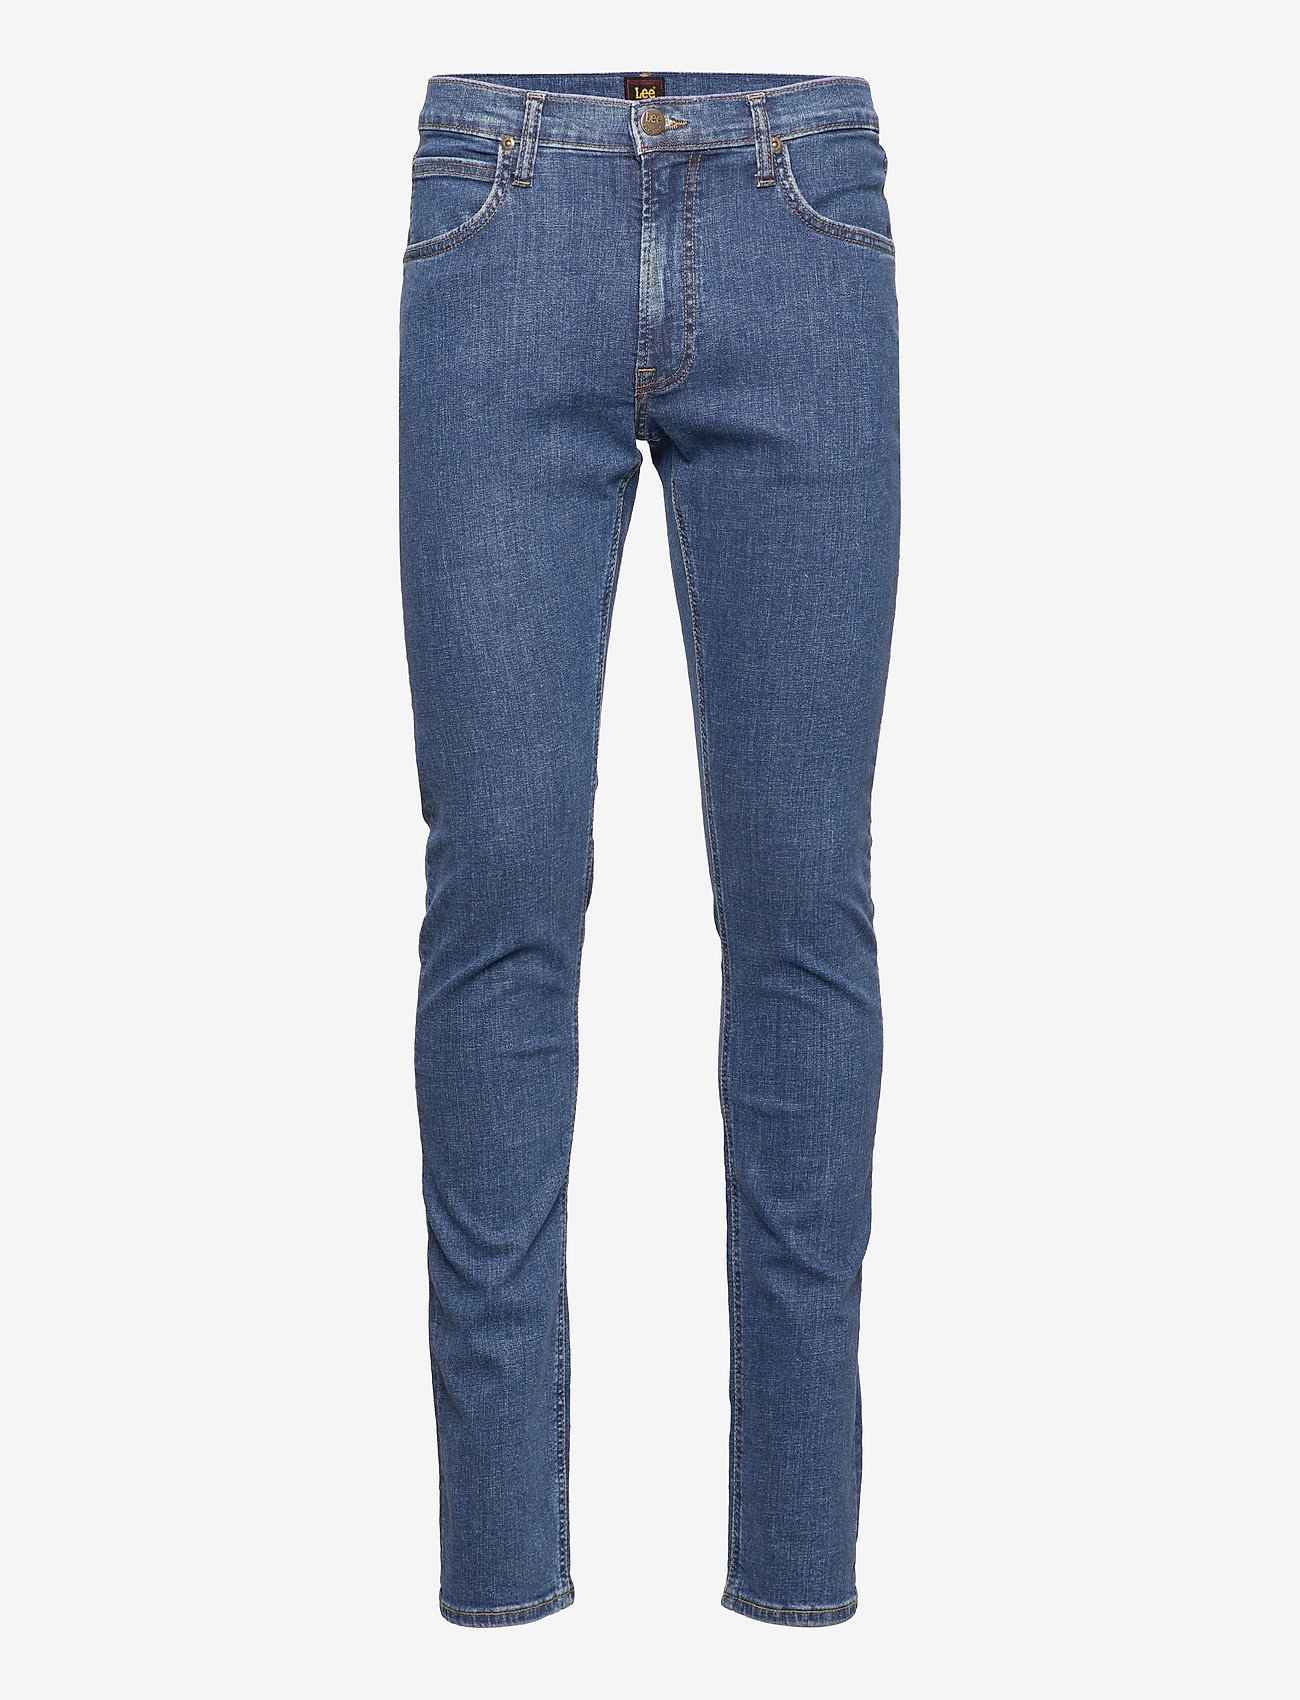 Lee Jeans - LUKE - tapered jeans - mid stone wash - 1